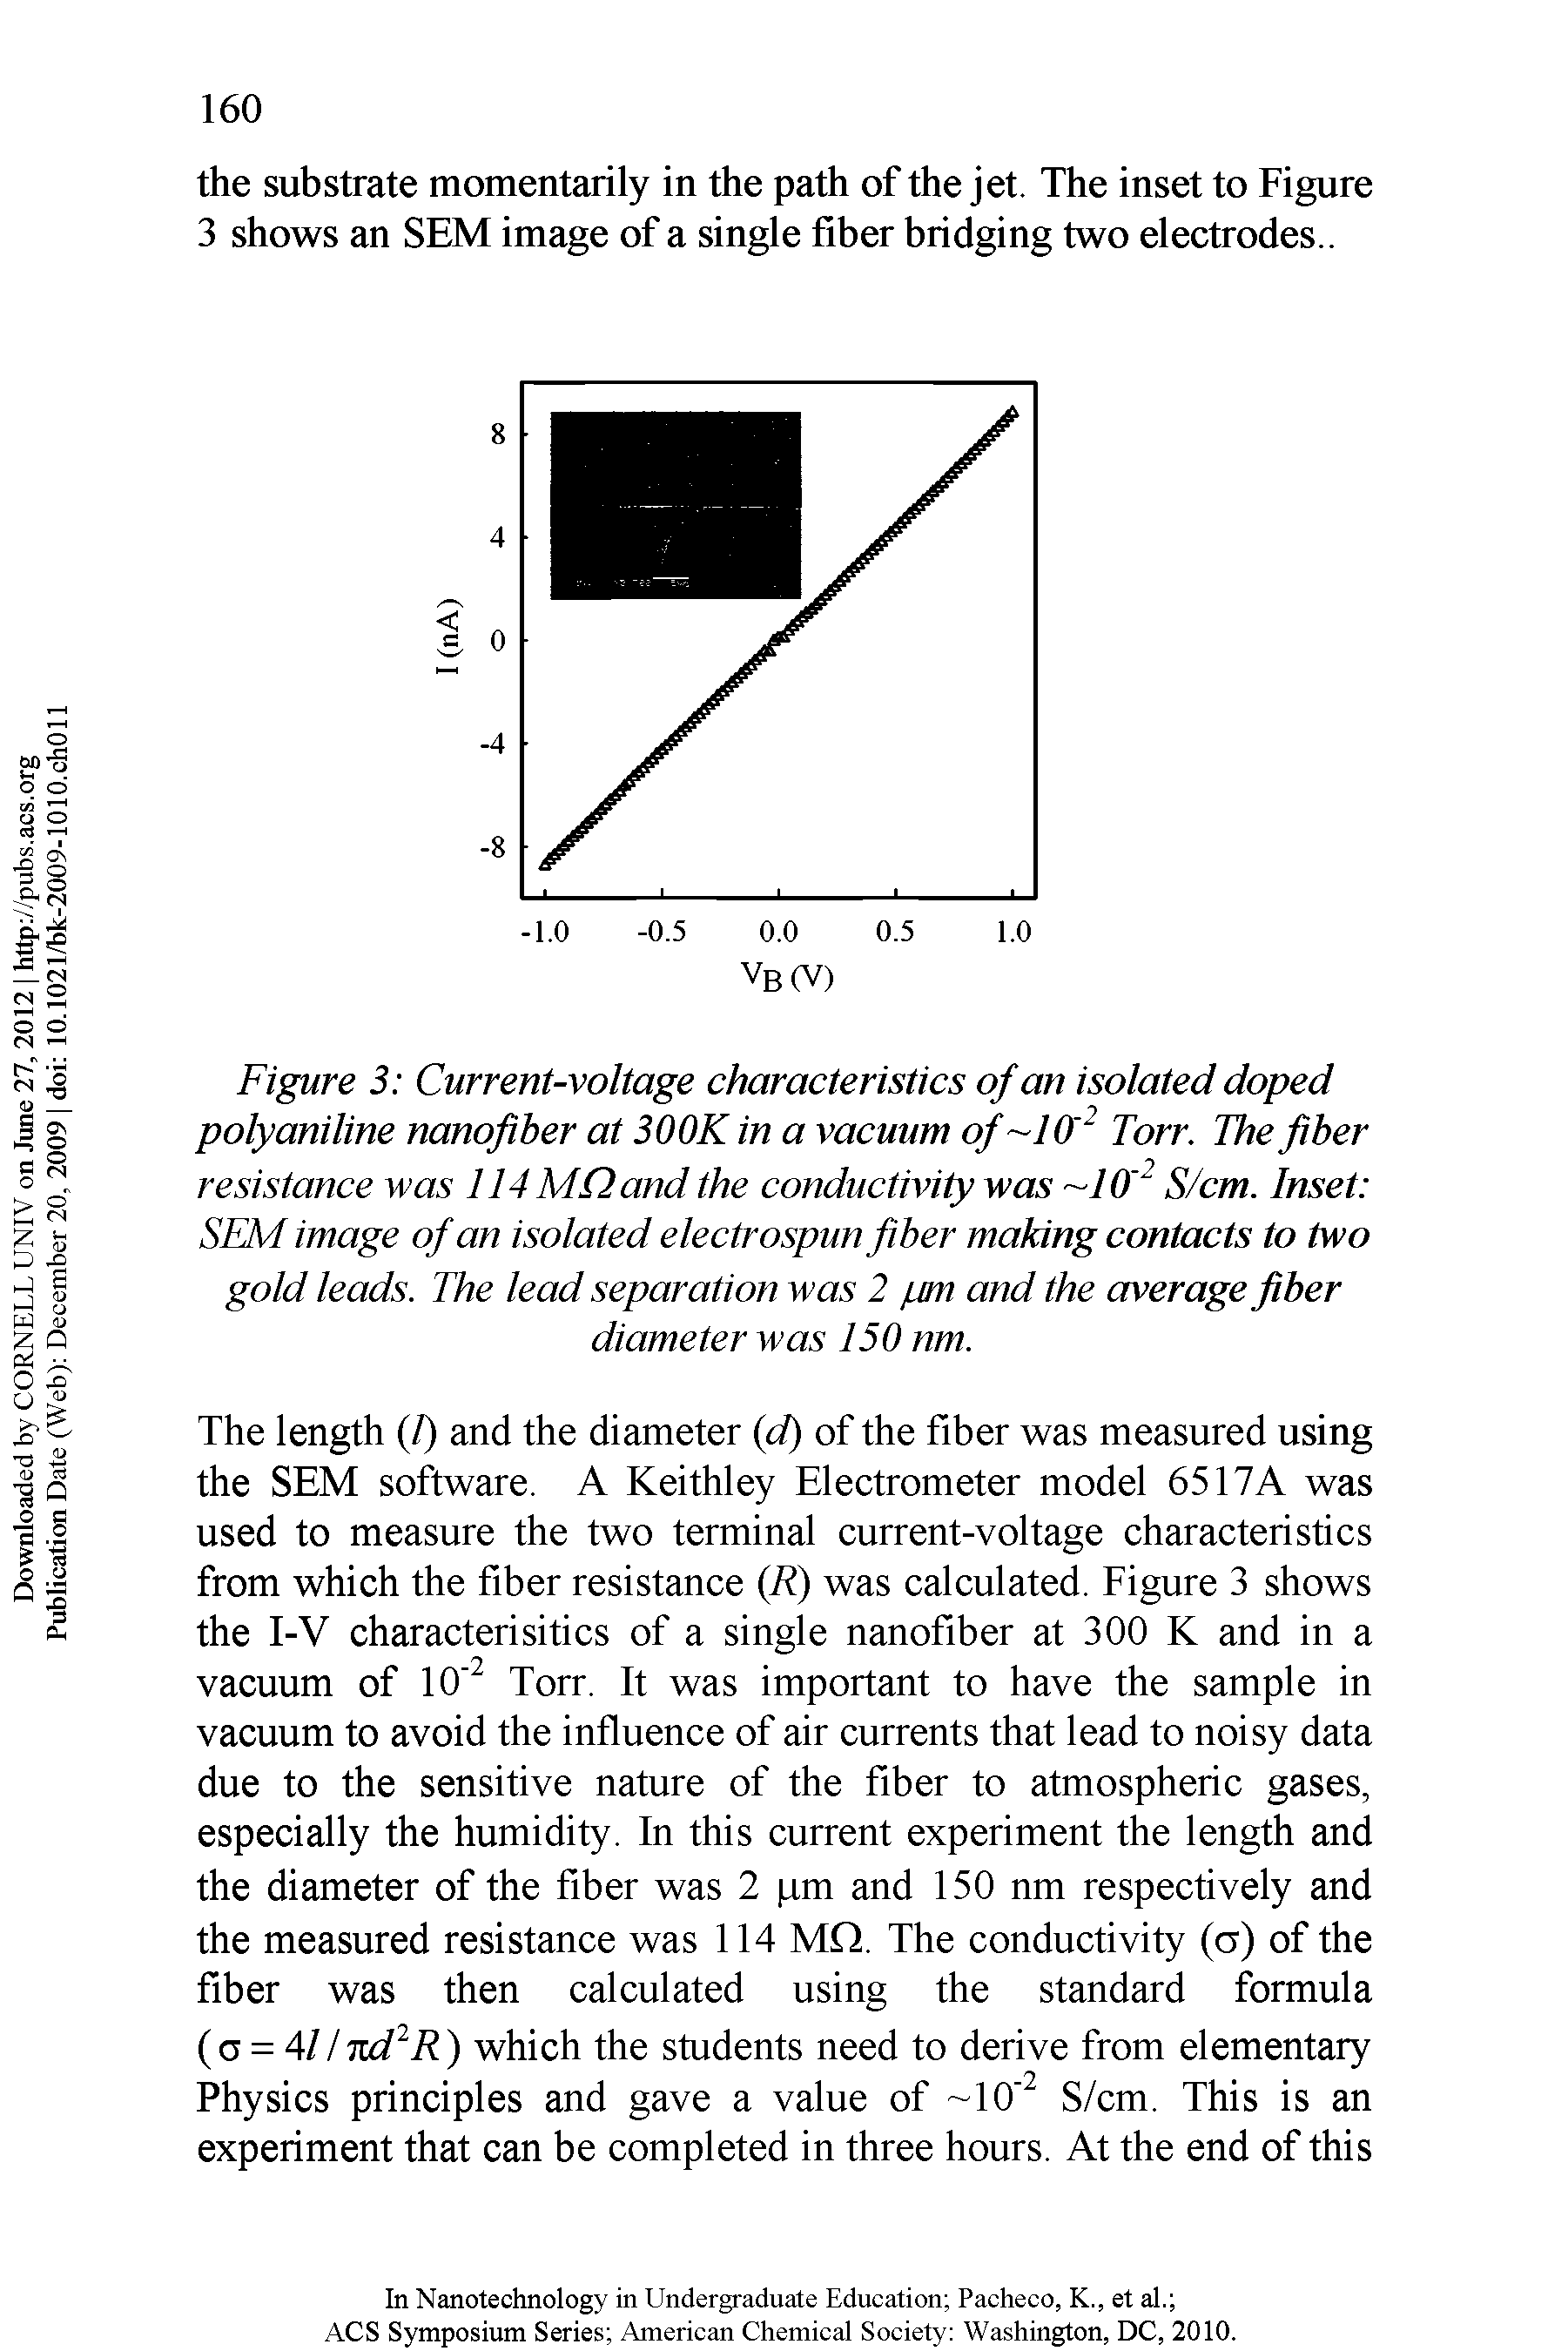 Figure 3 Current-voltage characteristics of an isolated doped poly aniline nanofiher at 30 OK in a vacuum of W Torr. The fiber resistance was 114 MO and the conductivity was 10 S/cm. Inset SEM image of an isolated electrospun fiber making contacts to two gold leads. The lead separation was 2 jum and the average fiber diameter was 150 nm.